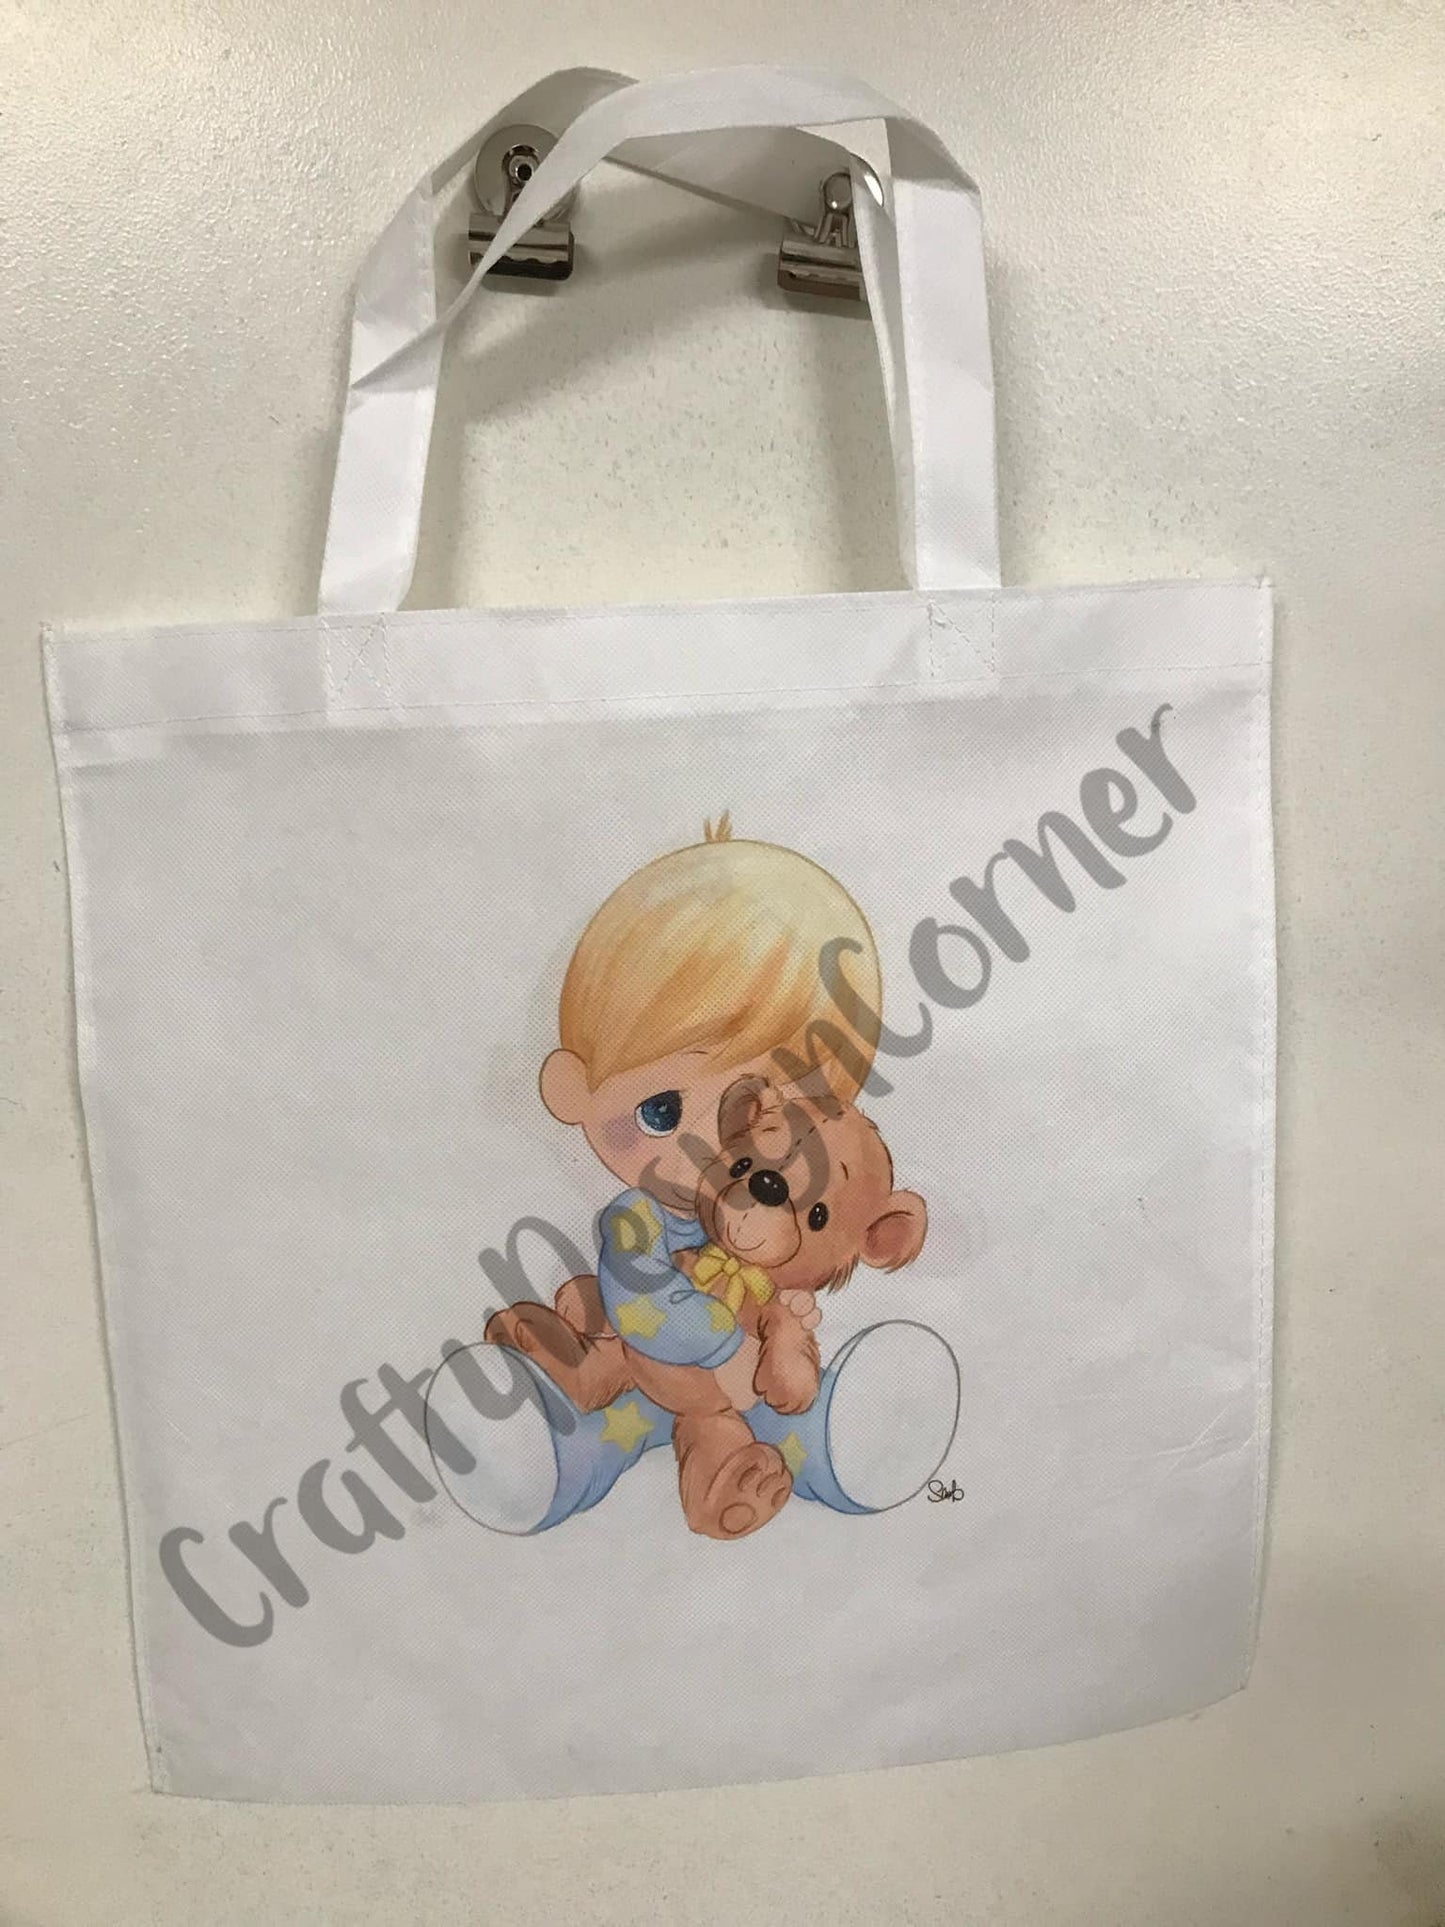 Double sided OOPSIE BAG RTS Little girl with bunny designed Tote Bag Eco Friendly